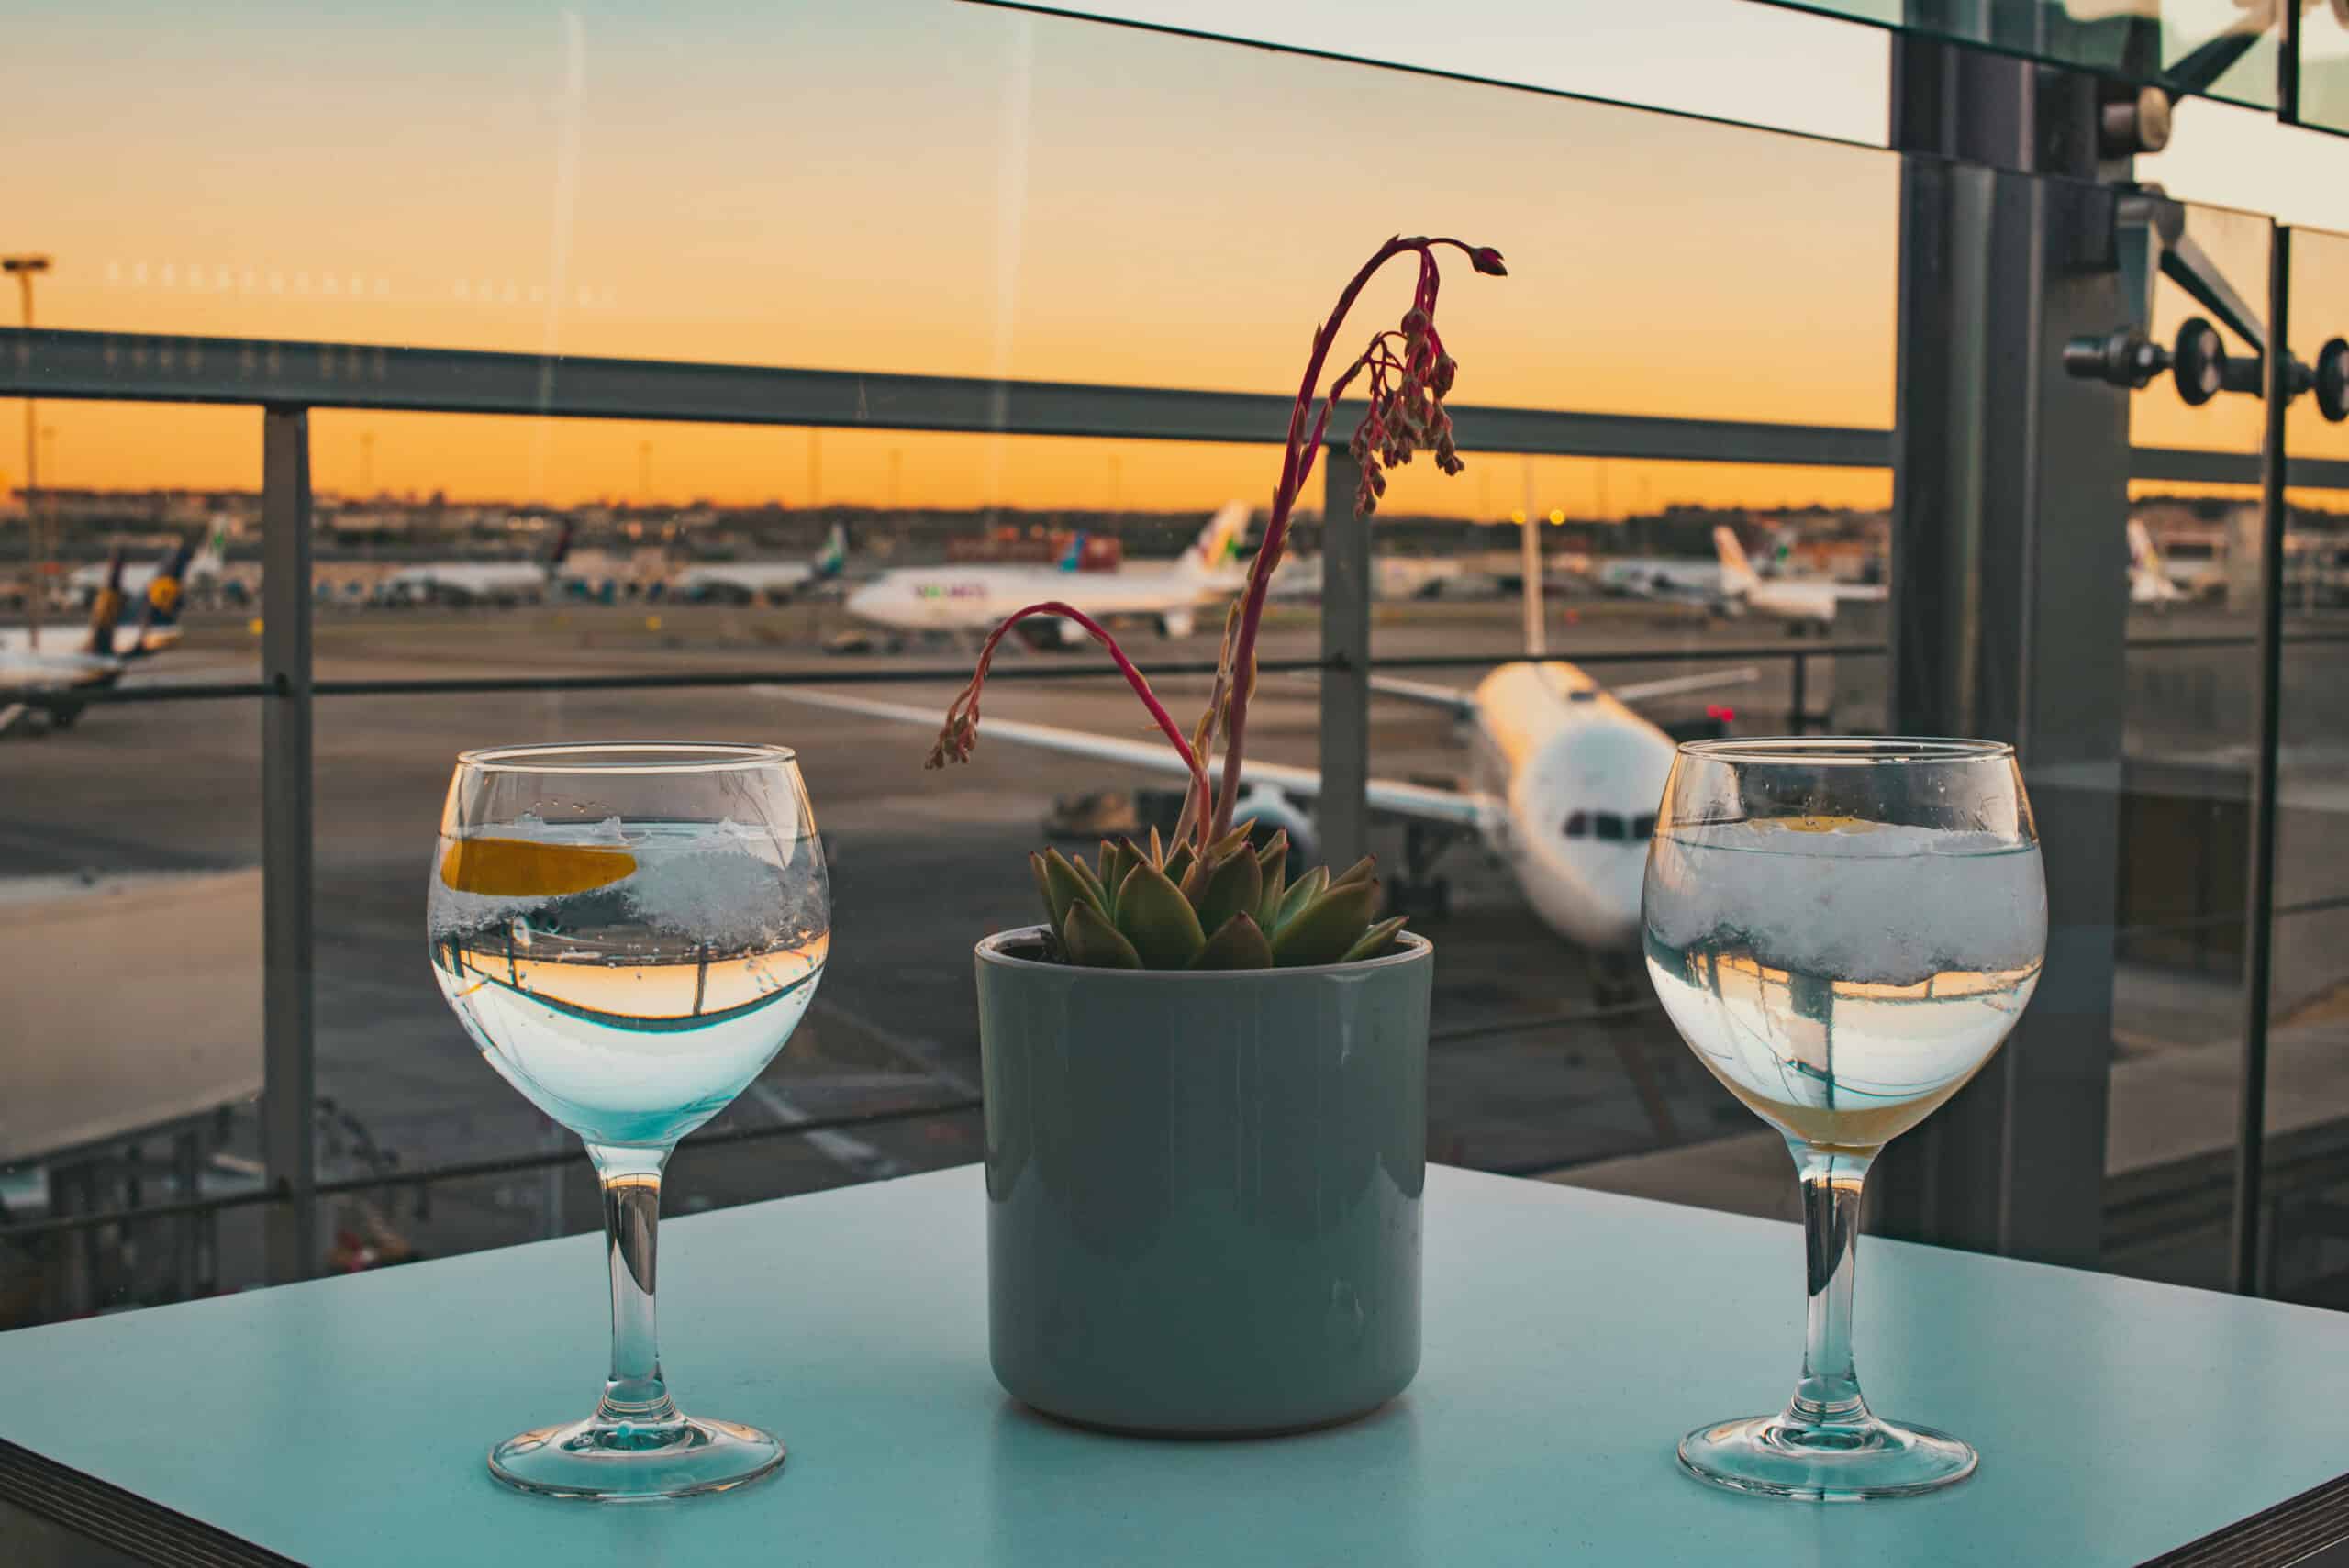 A refreshing drink at the airport terrace before catching a flig